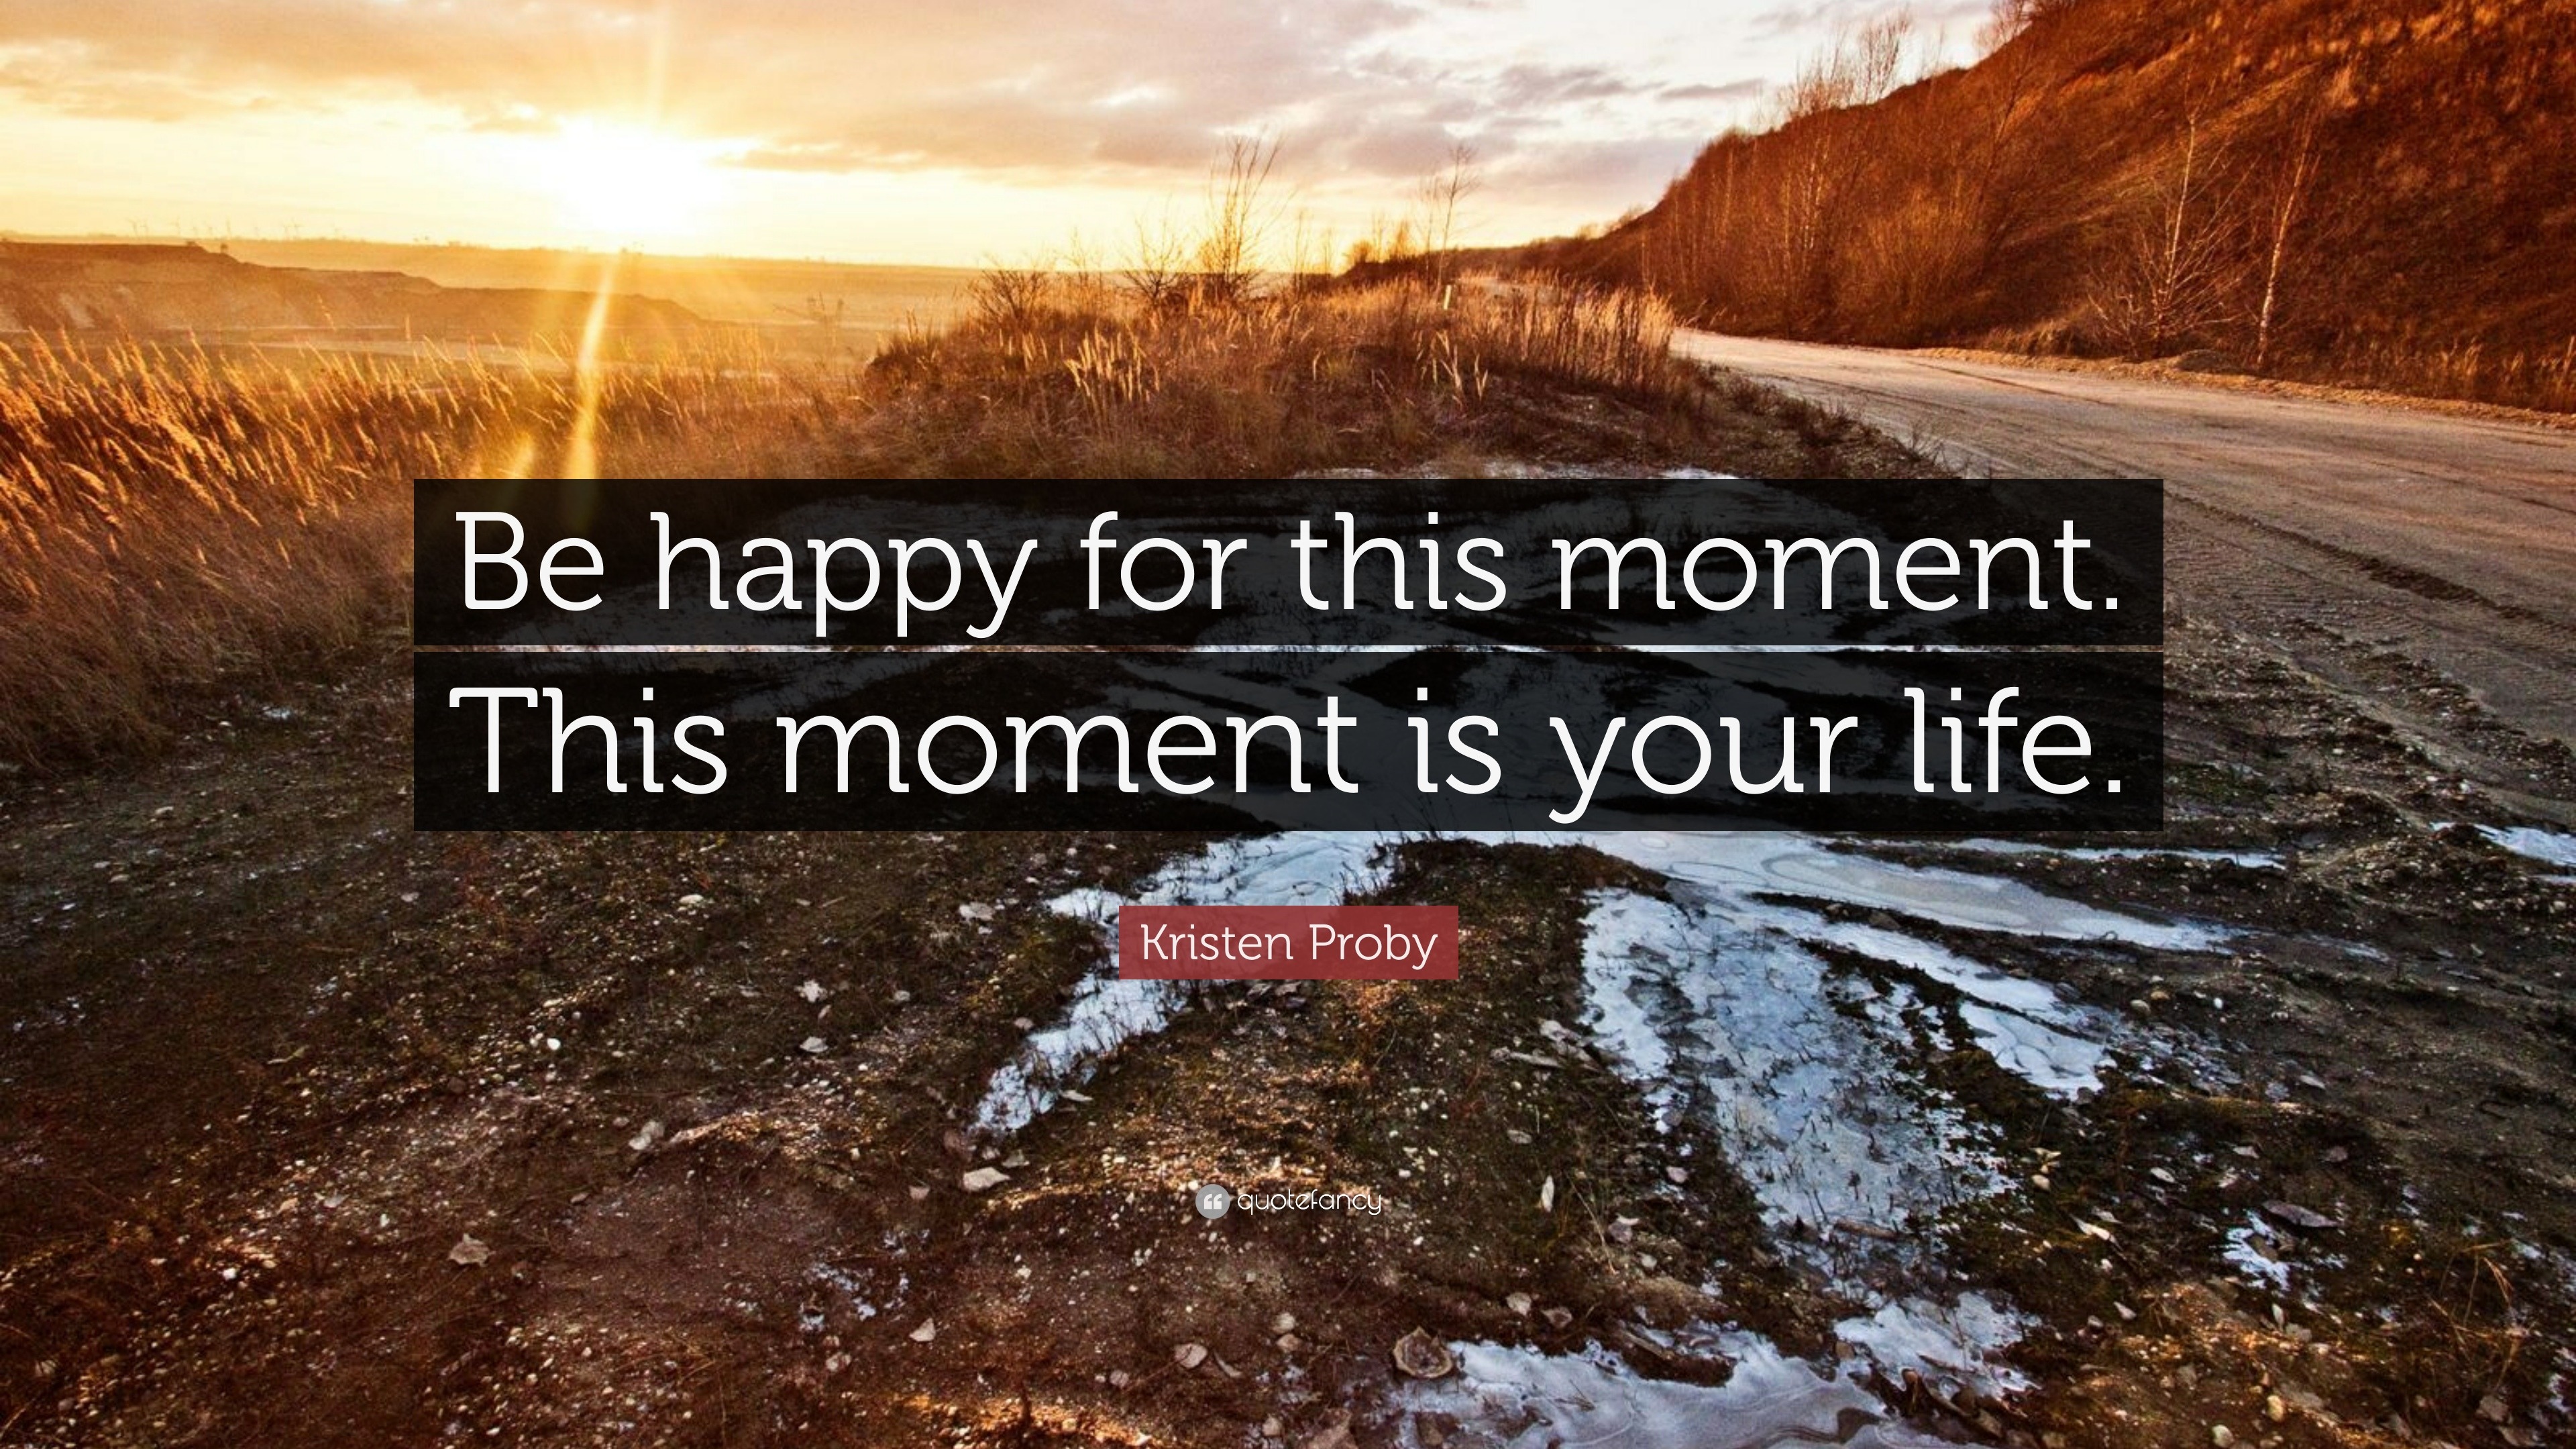 Kristen Proby Quote “Be happy for this moment This moment is your life